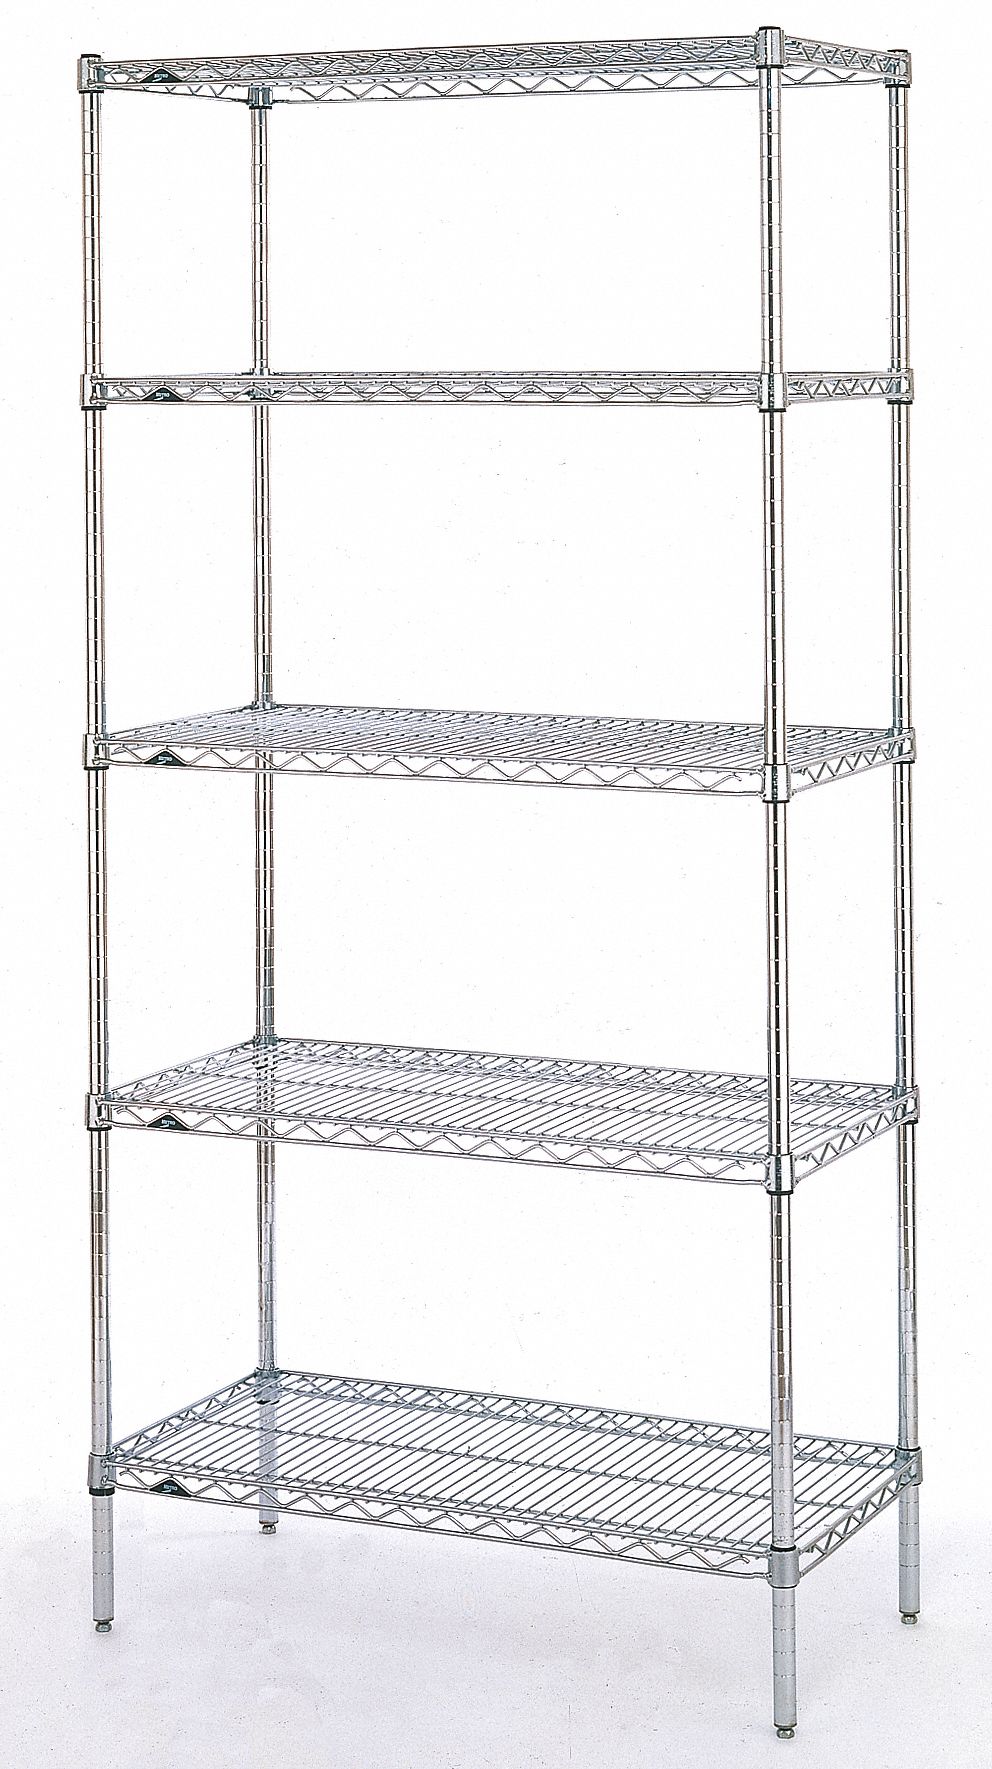 Metro Wire Shelving Unit Starter 48, 24 Inch Wire Shelving Units